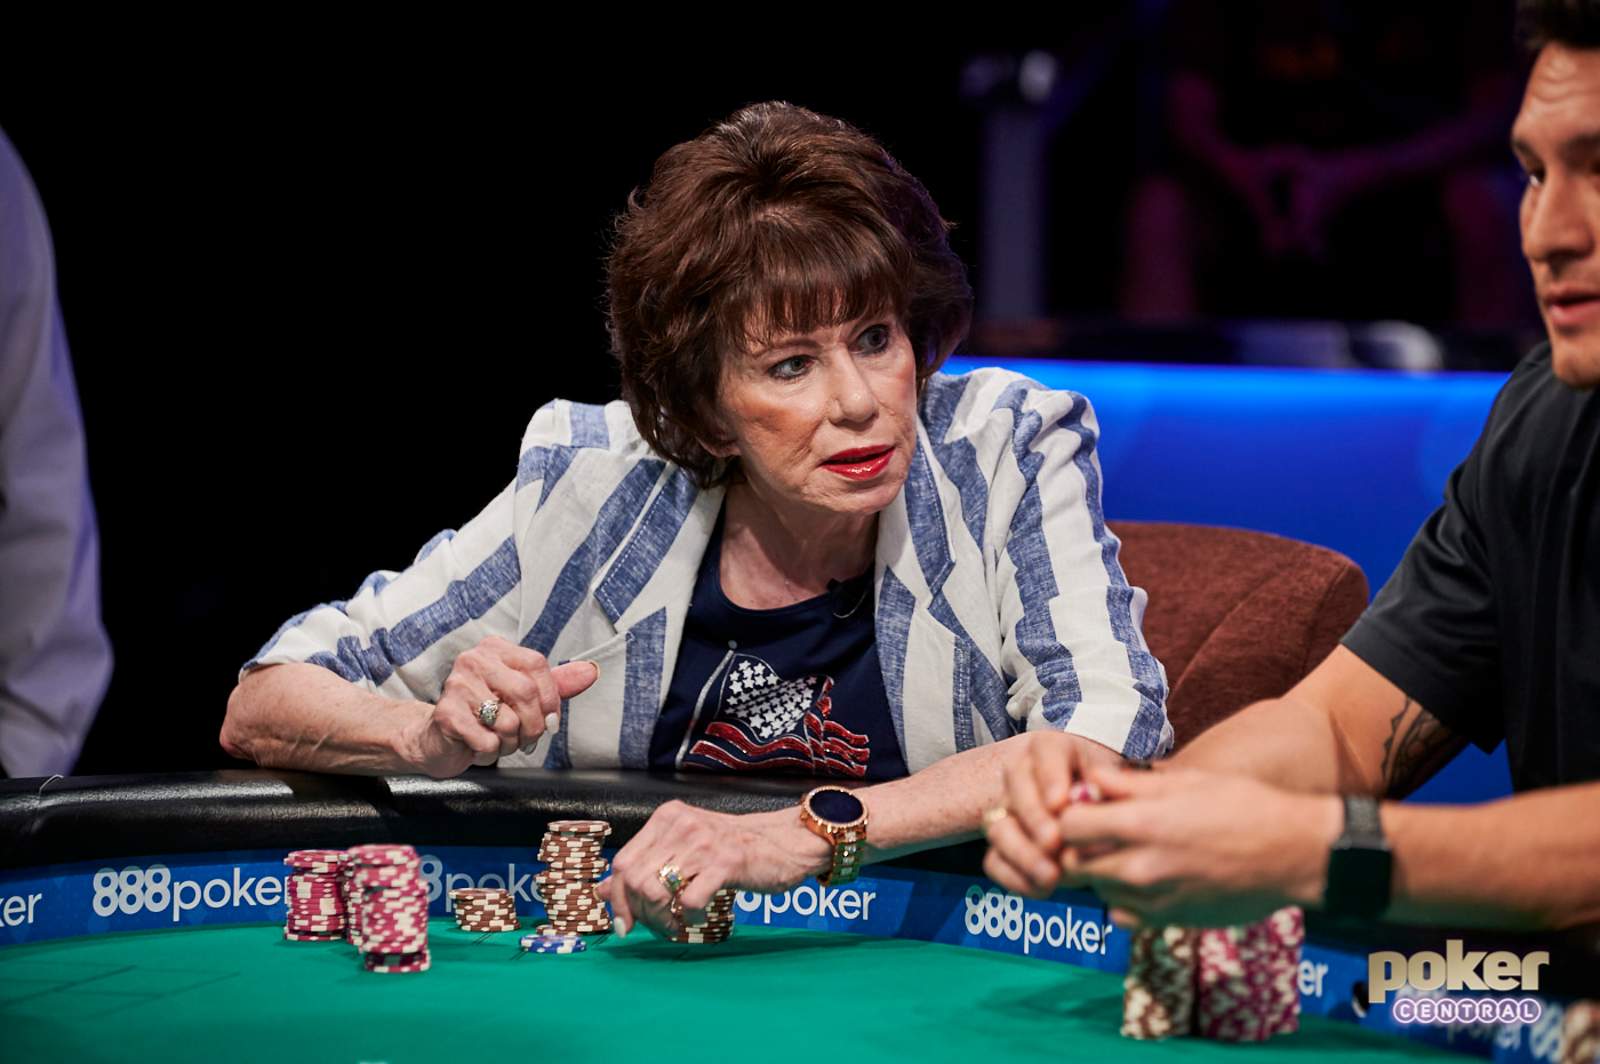 Susan Faber Wins Salute to Warriors Event for $121,161!